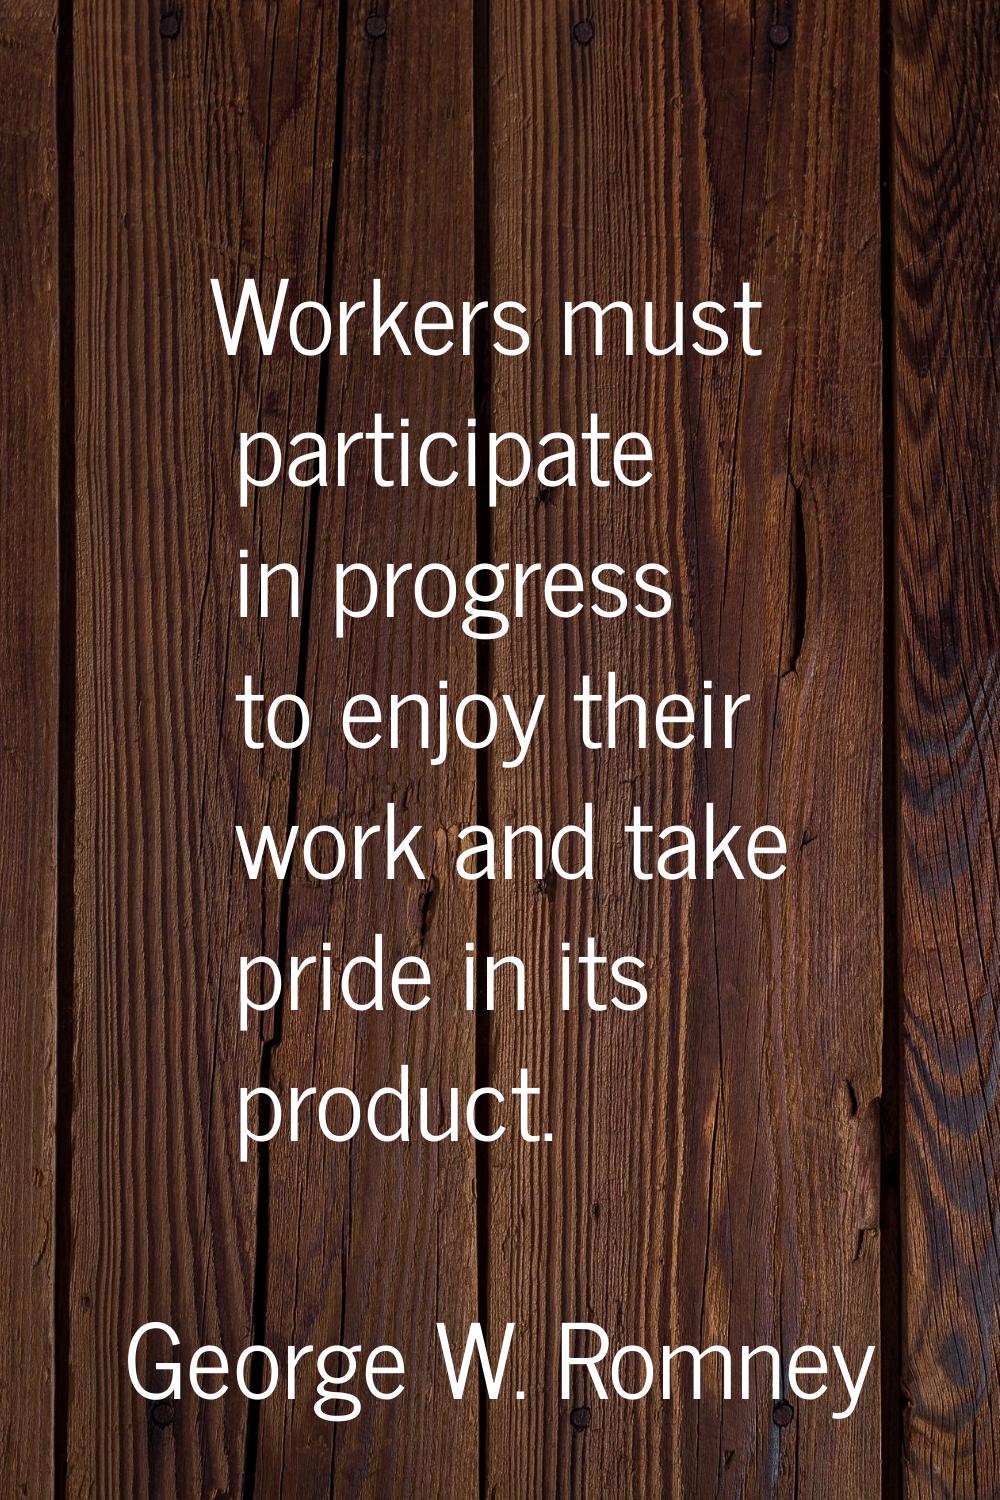 Workers must participate in progress to enjoy their work and take pride in its product.